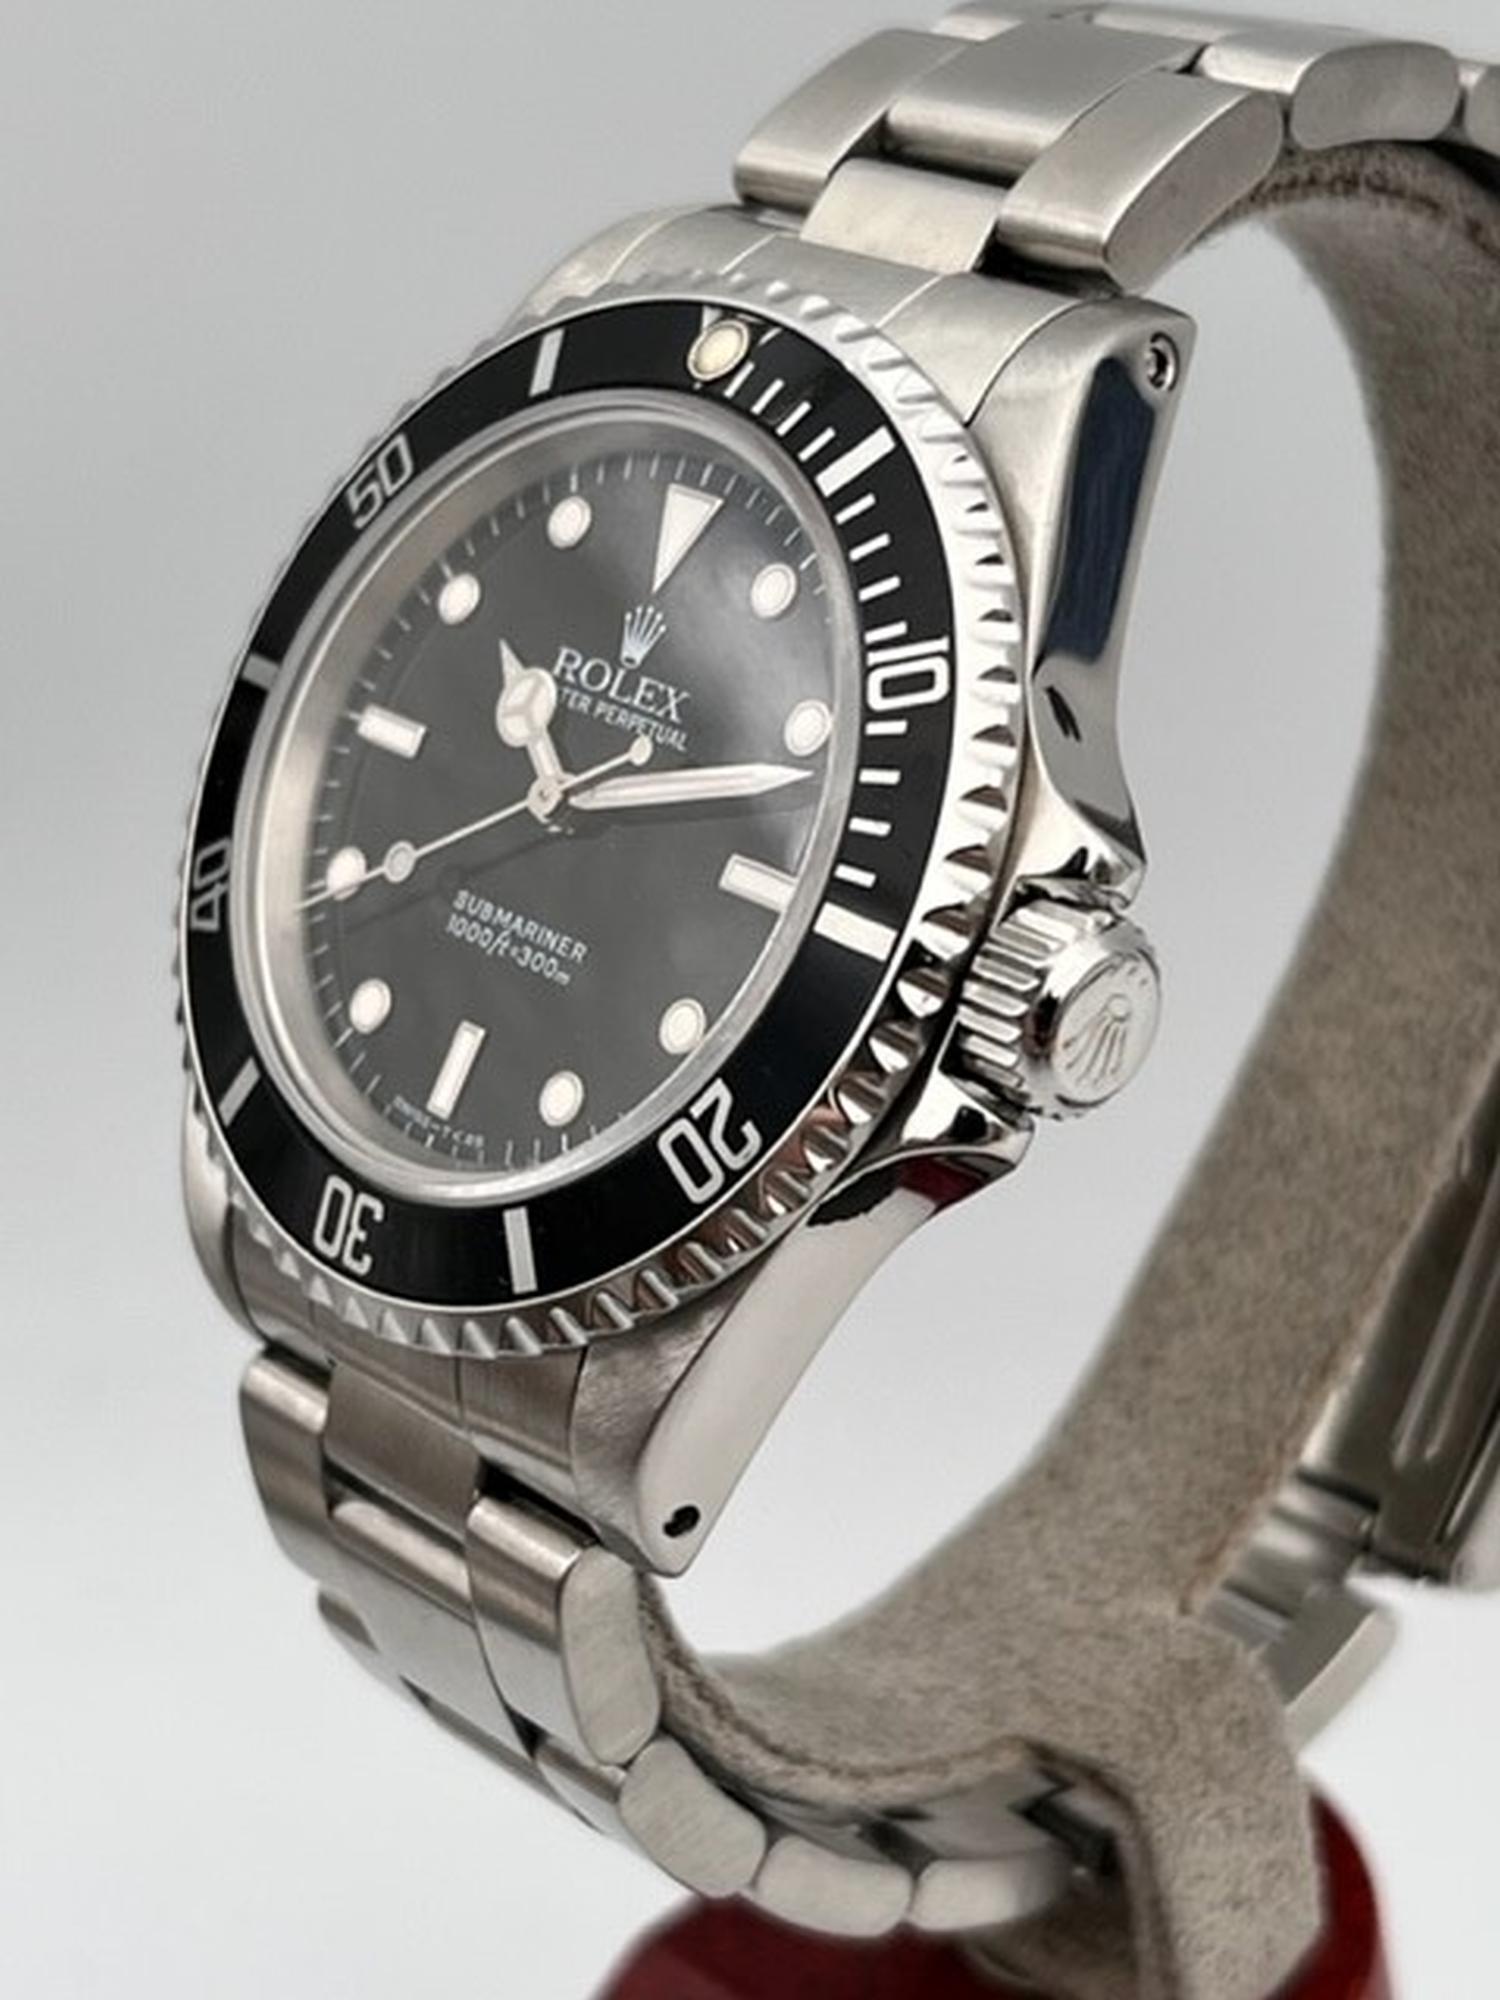 ROLEX SUBMARINER NO DATE 14060 WITH BOX AND PAPERS 1998 - Image 5 of 9